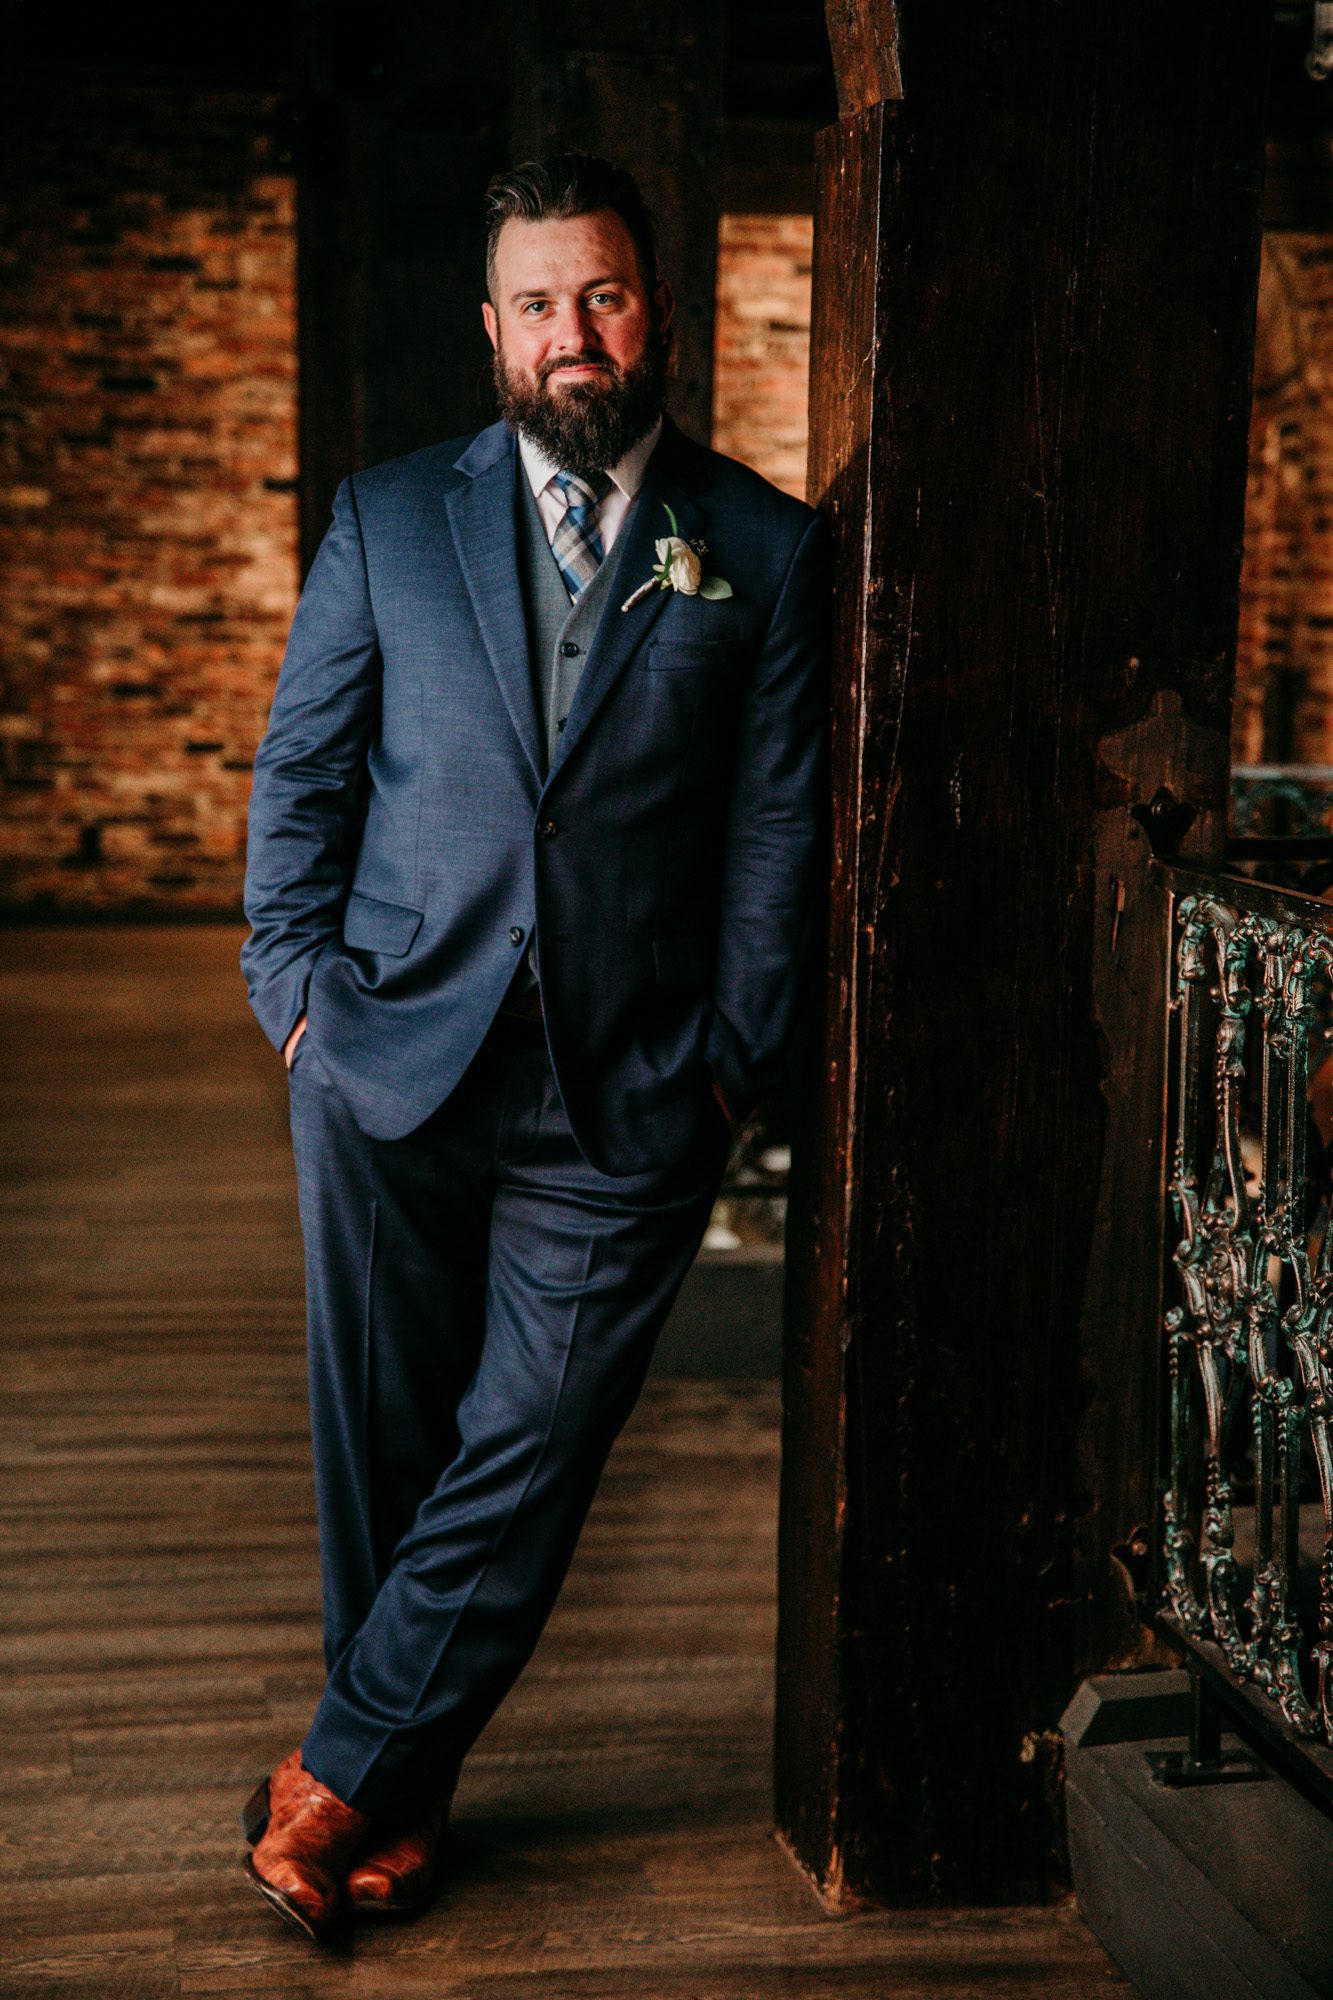  Groom inside a vintage brick building old world charm at the Bedford event and wedding venue in Nashville TN. Photo by Krista Lee Photography